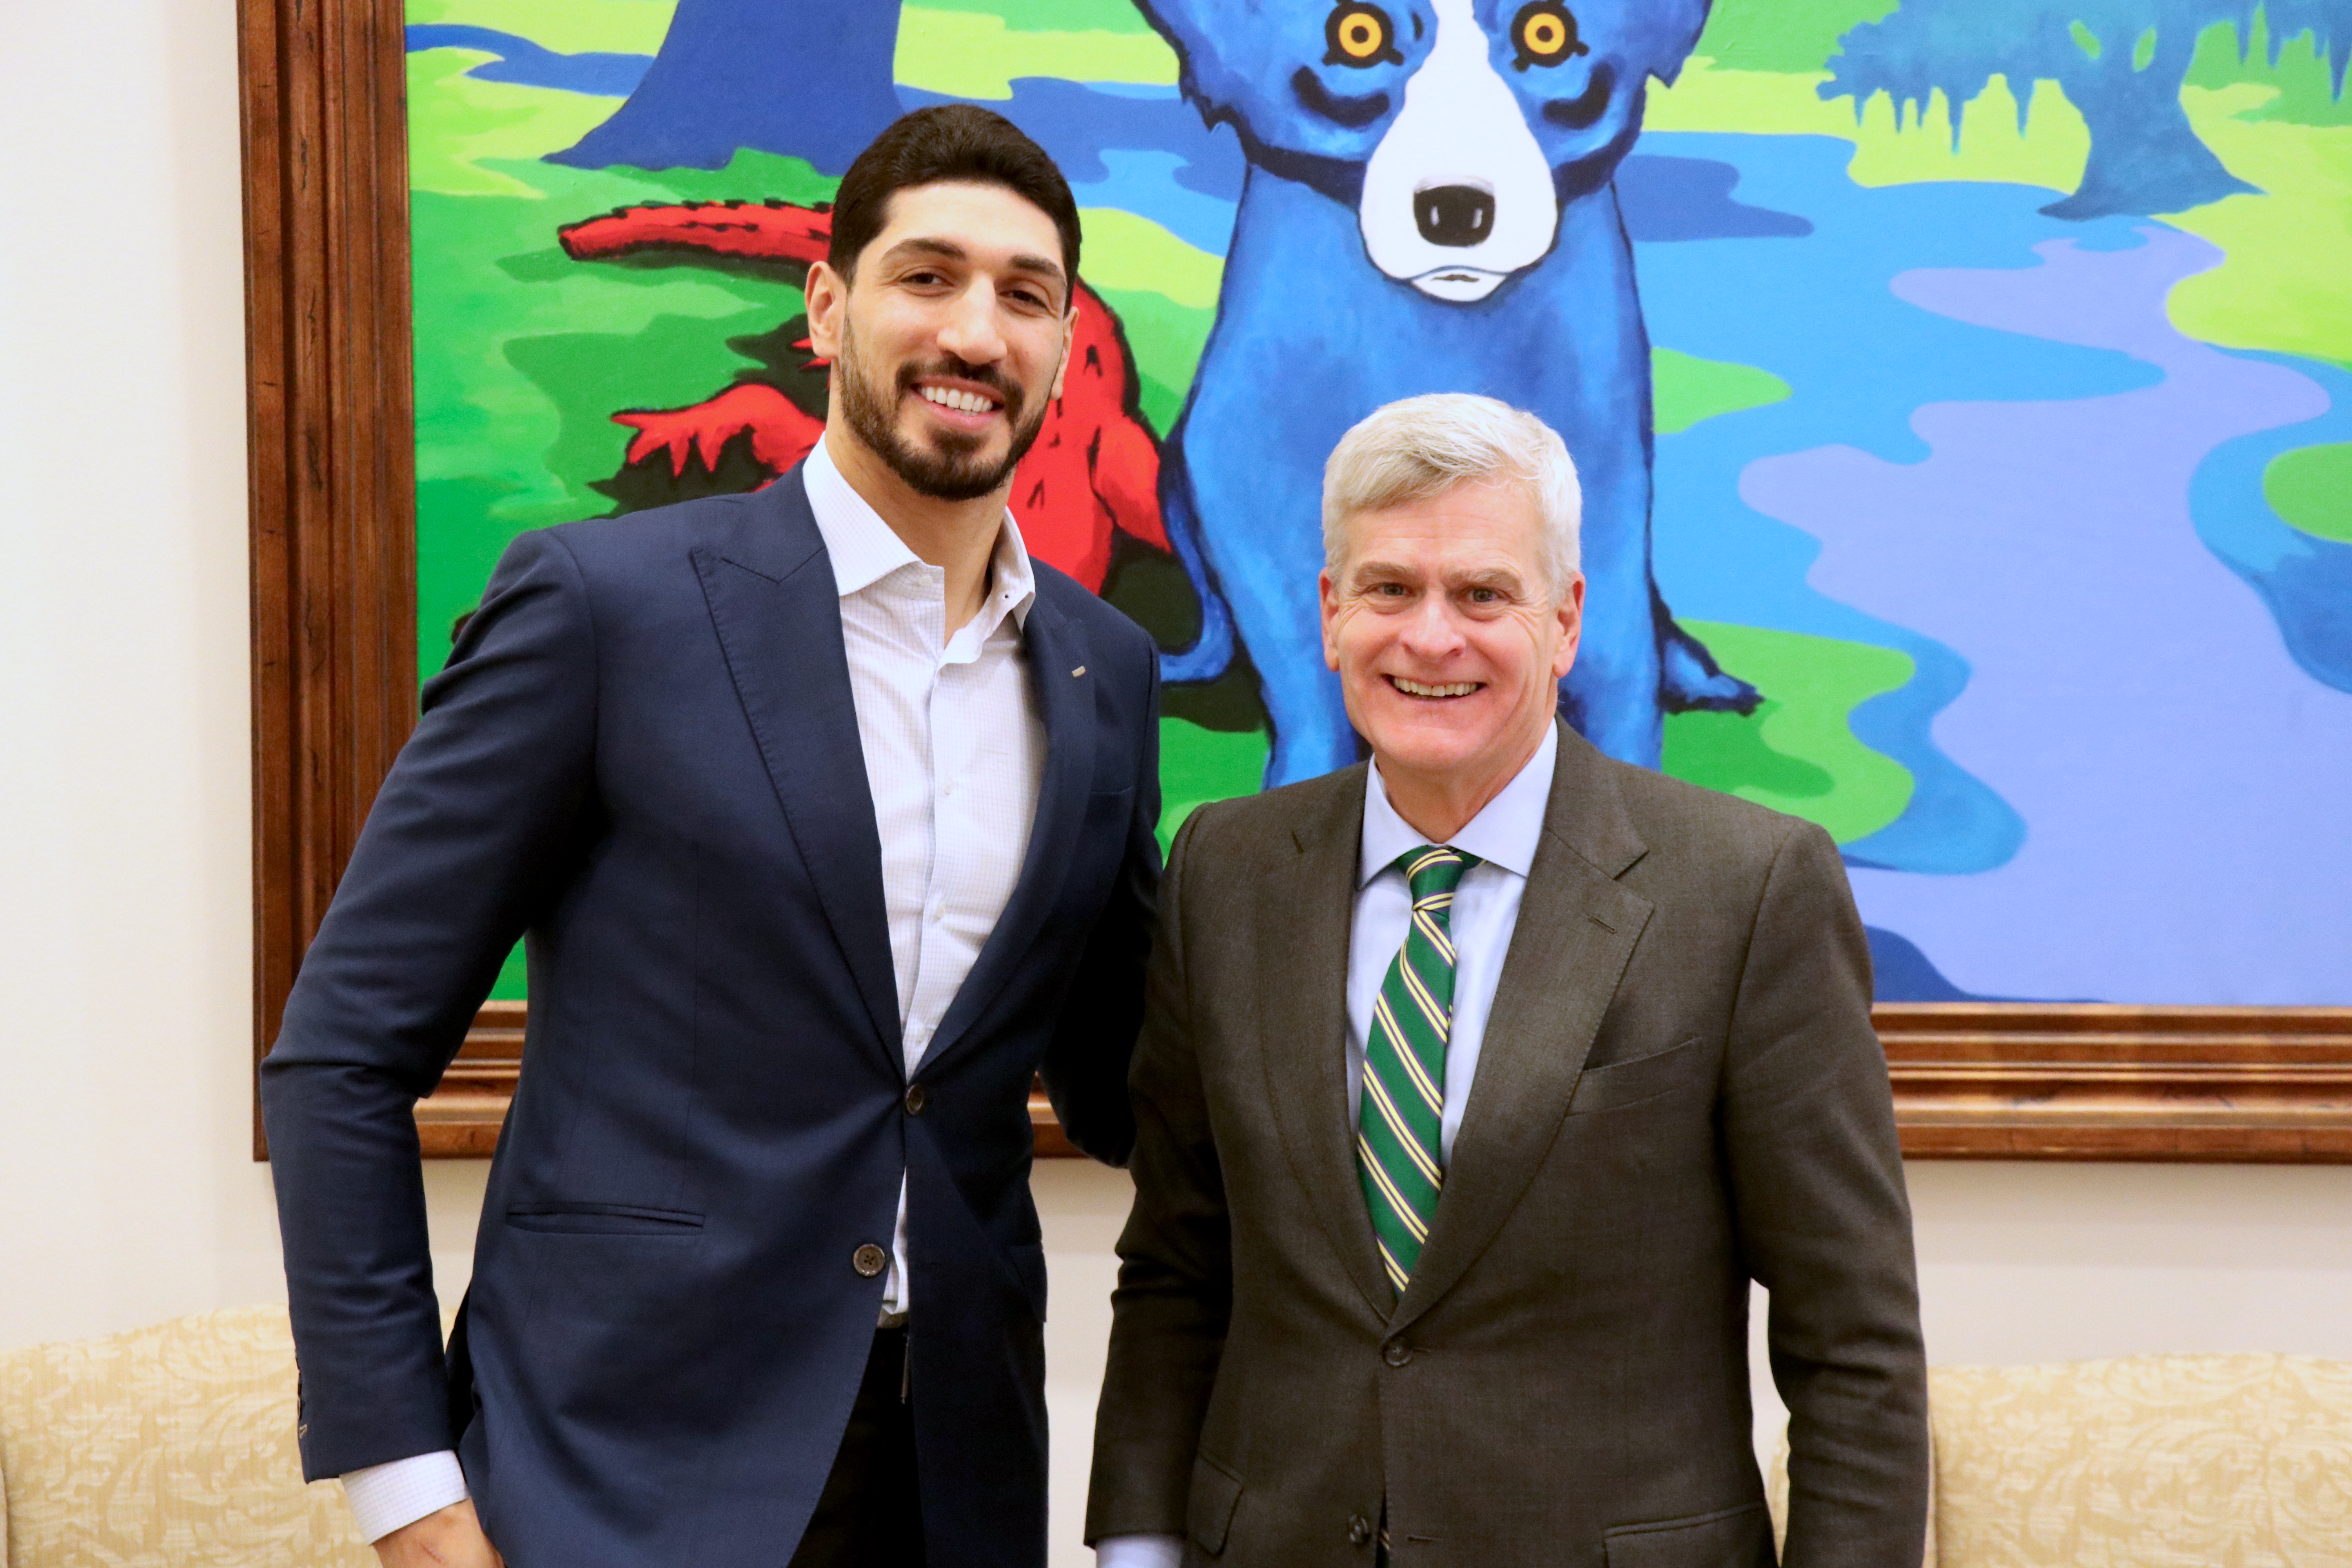 Enes Kanter Freedom Receives Human Rights Award After Being Ousted From NBA